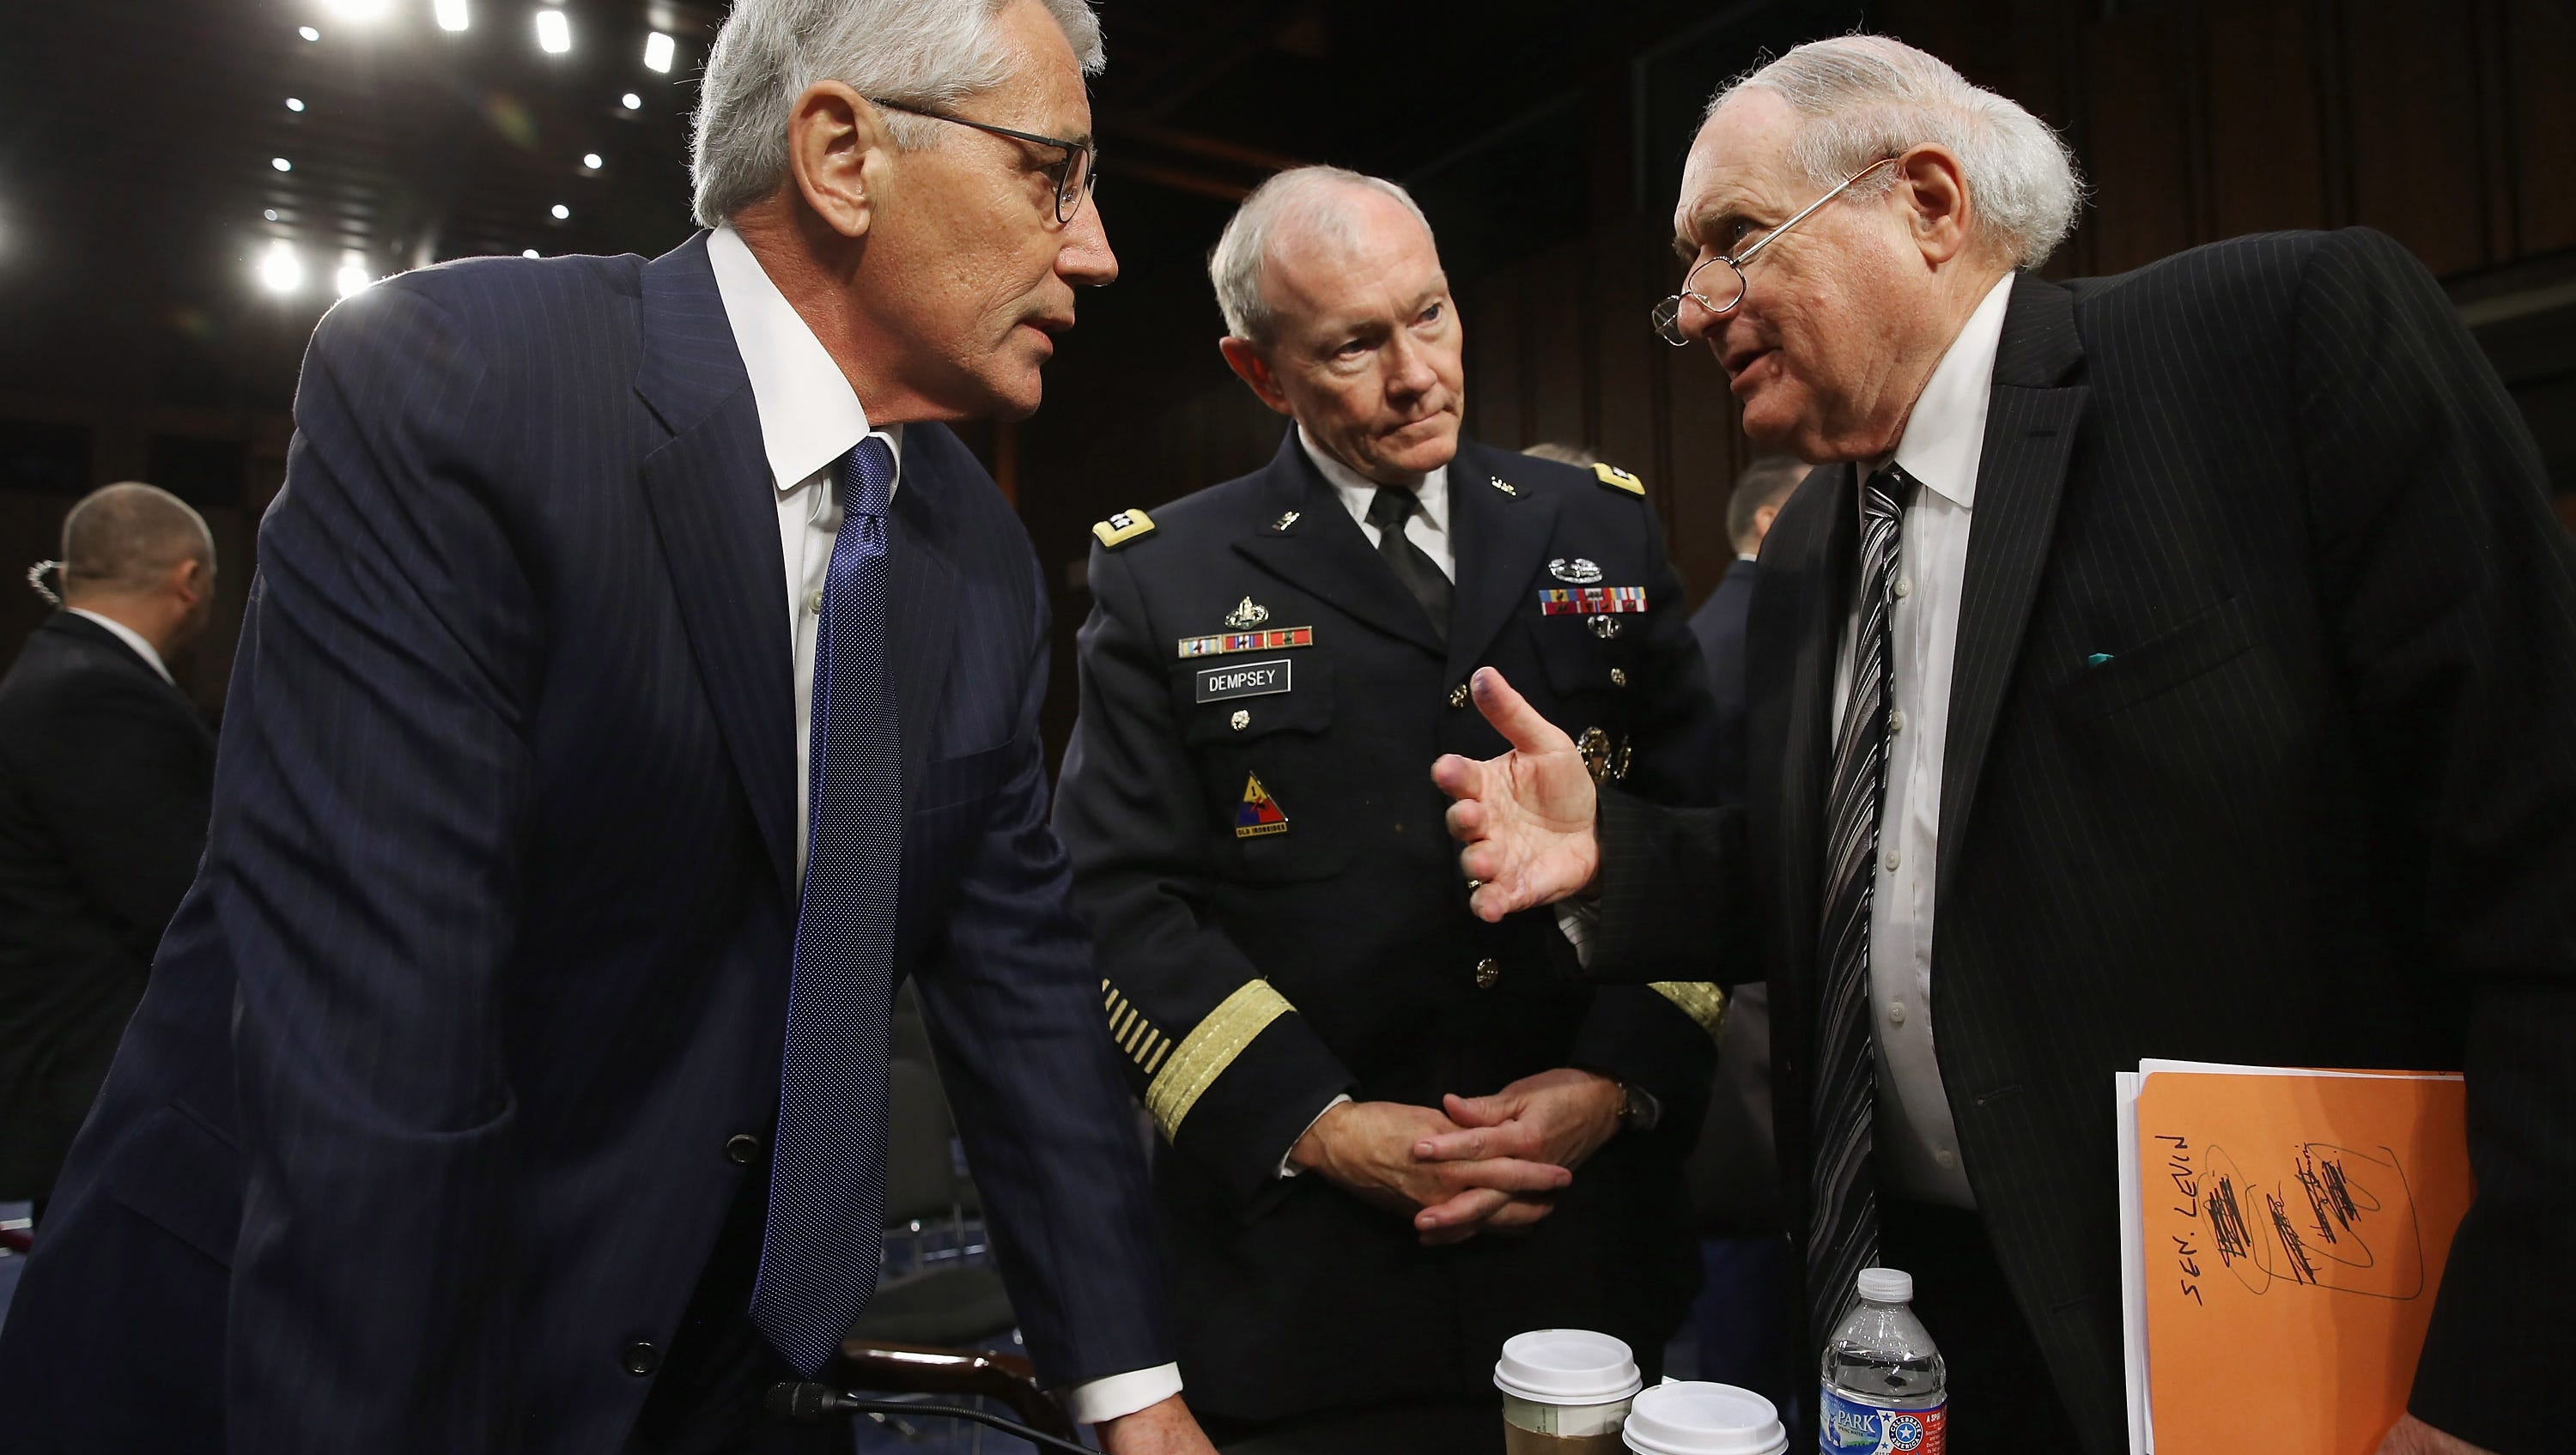 U.S. Defense Secretary Chuck Hagel, left, Chairman of the Joint Chiefs of Staff Army Gen. Martin Dempsey and Carl Levin after a hearing in the Hart Senate Office Building on Capitol Hill Sept 16, 2014. Senators questioned the top military and civilian leaders about the threat posed by the terrorist group Islamic State of Iraq and the Levant or ISIL.